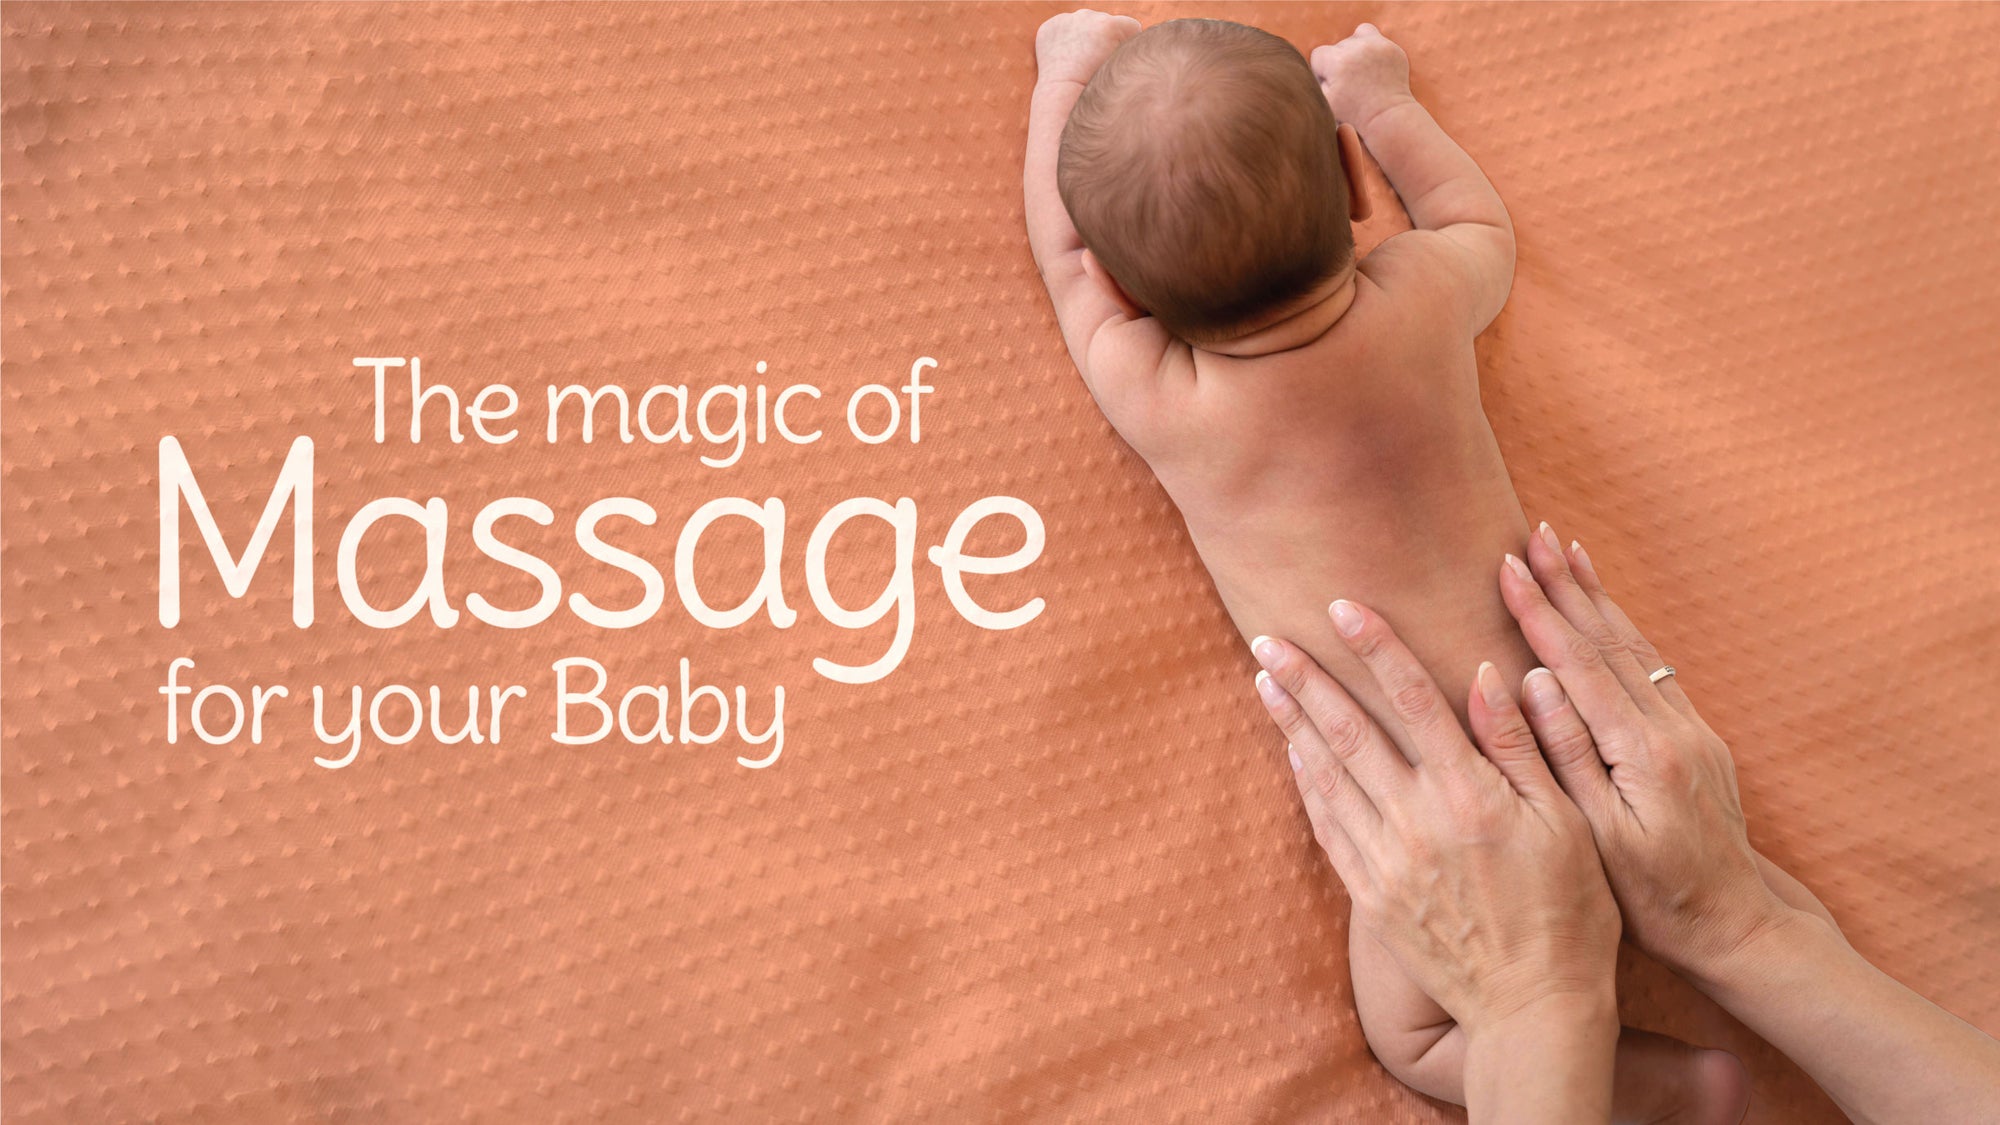 The magic of Massage for your Baby